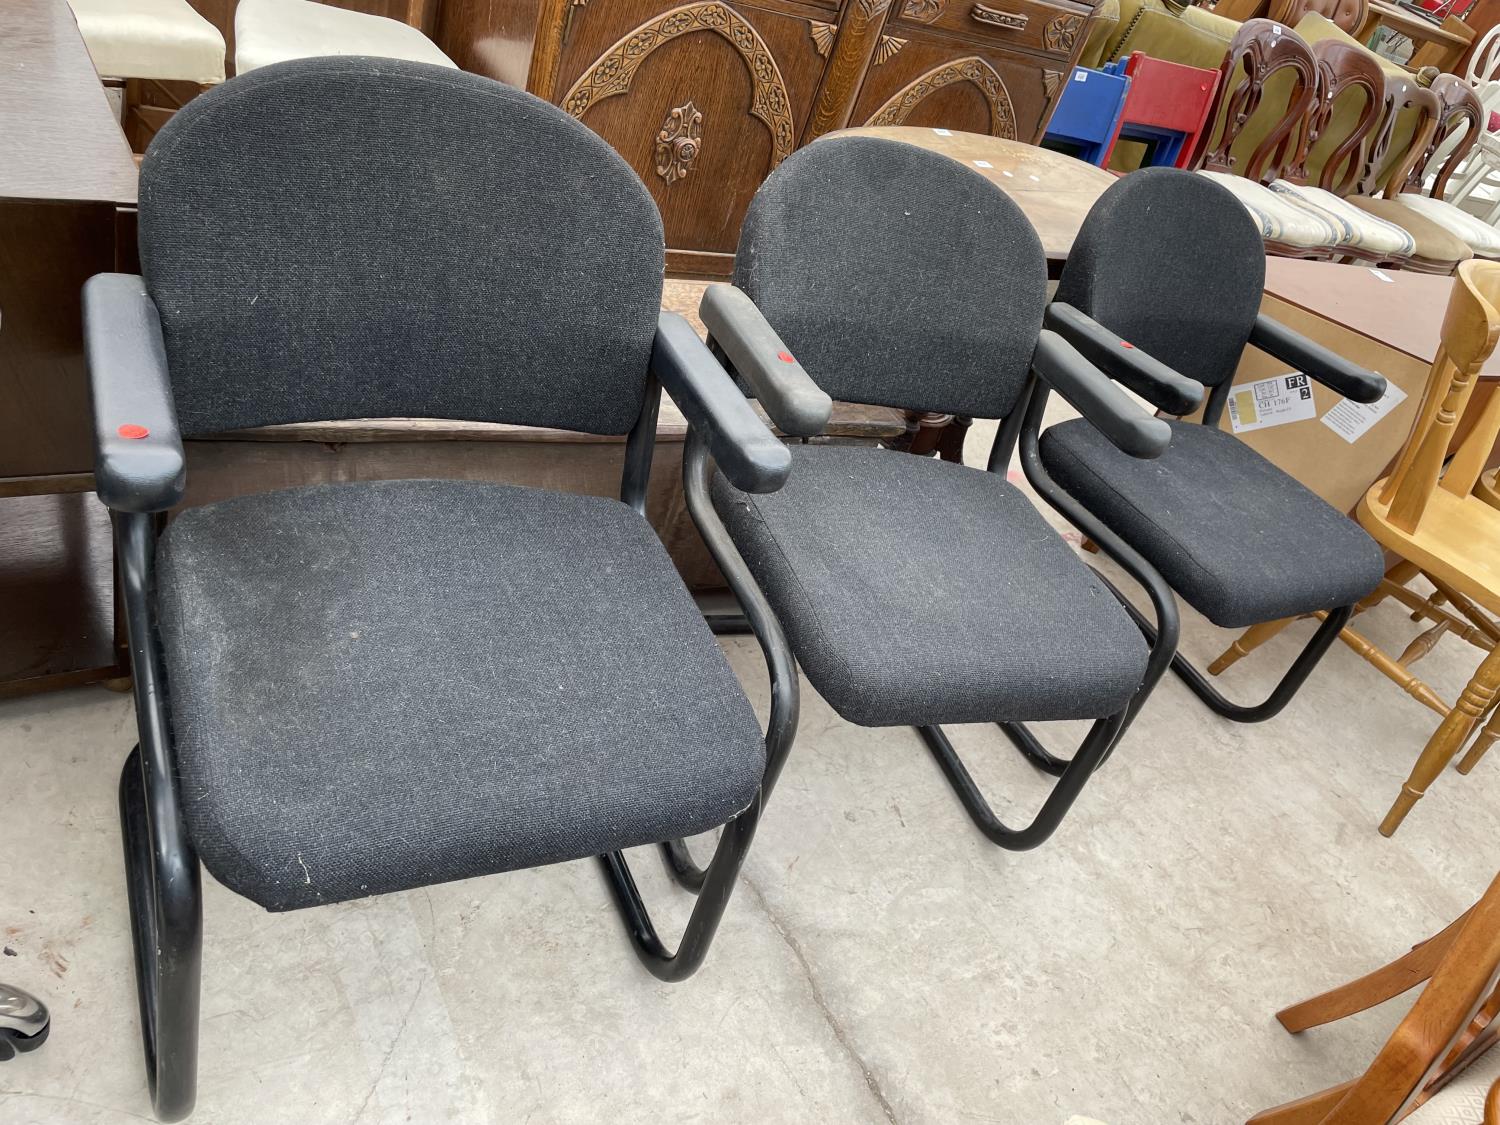 A NICEDAY SWIVEL BLACK OFFICE CHAIR AND THREE OFFICE ELBOW CHAIRS - Image 4 of 4